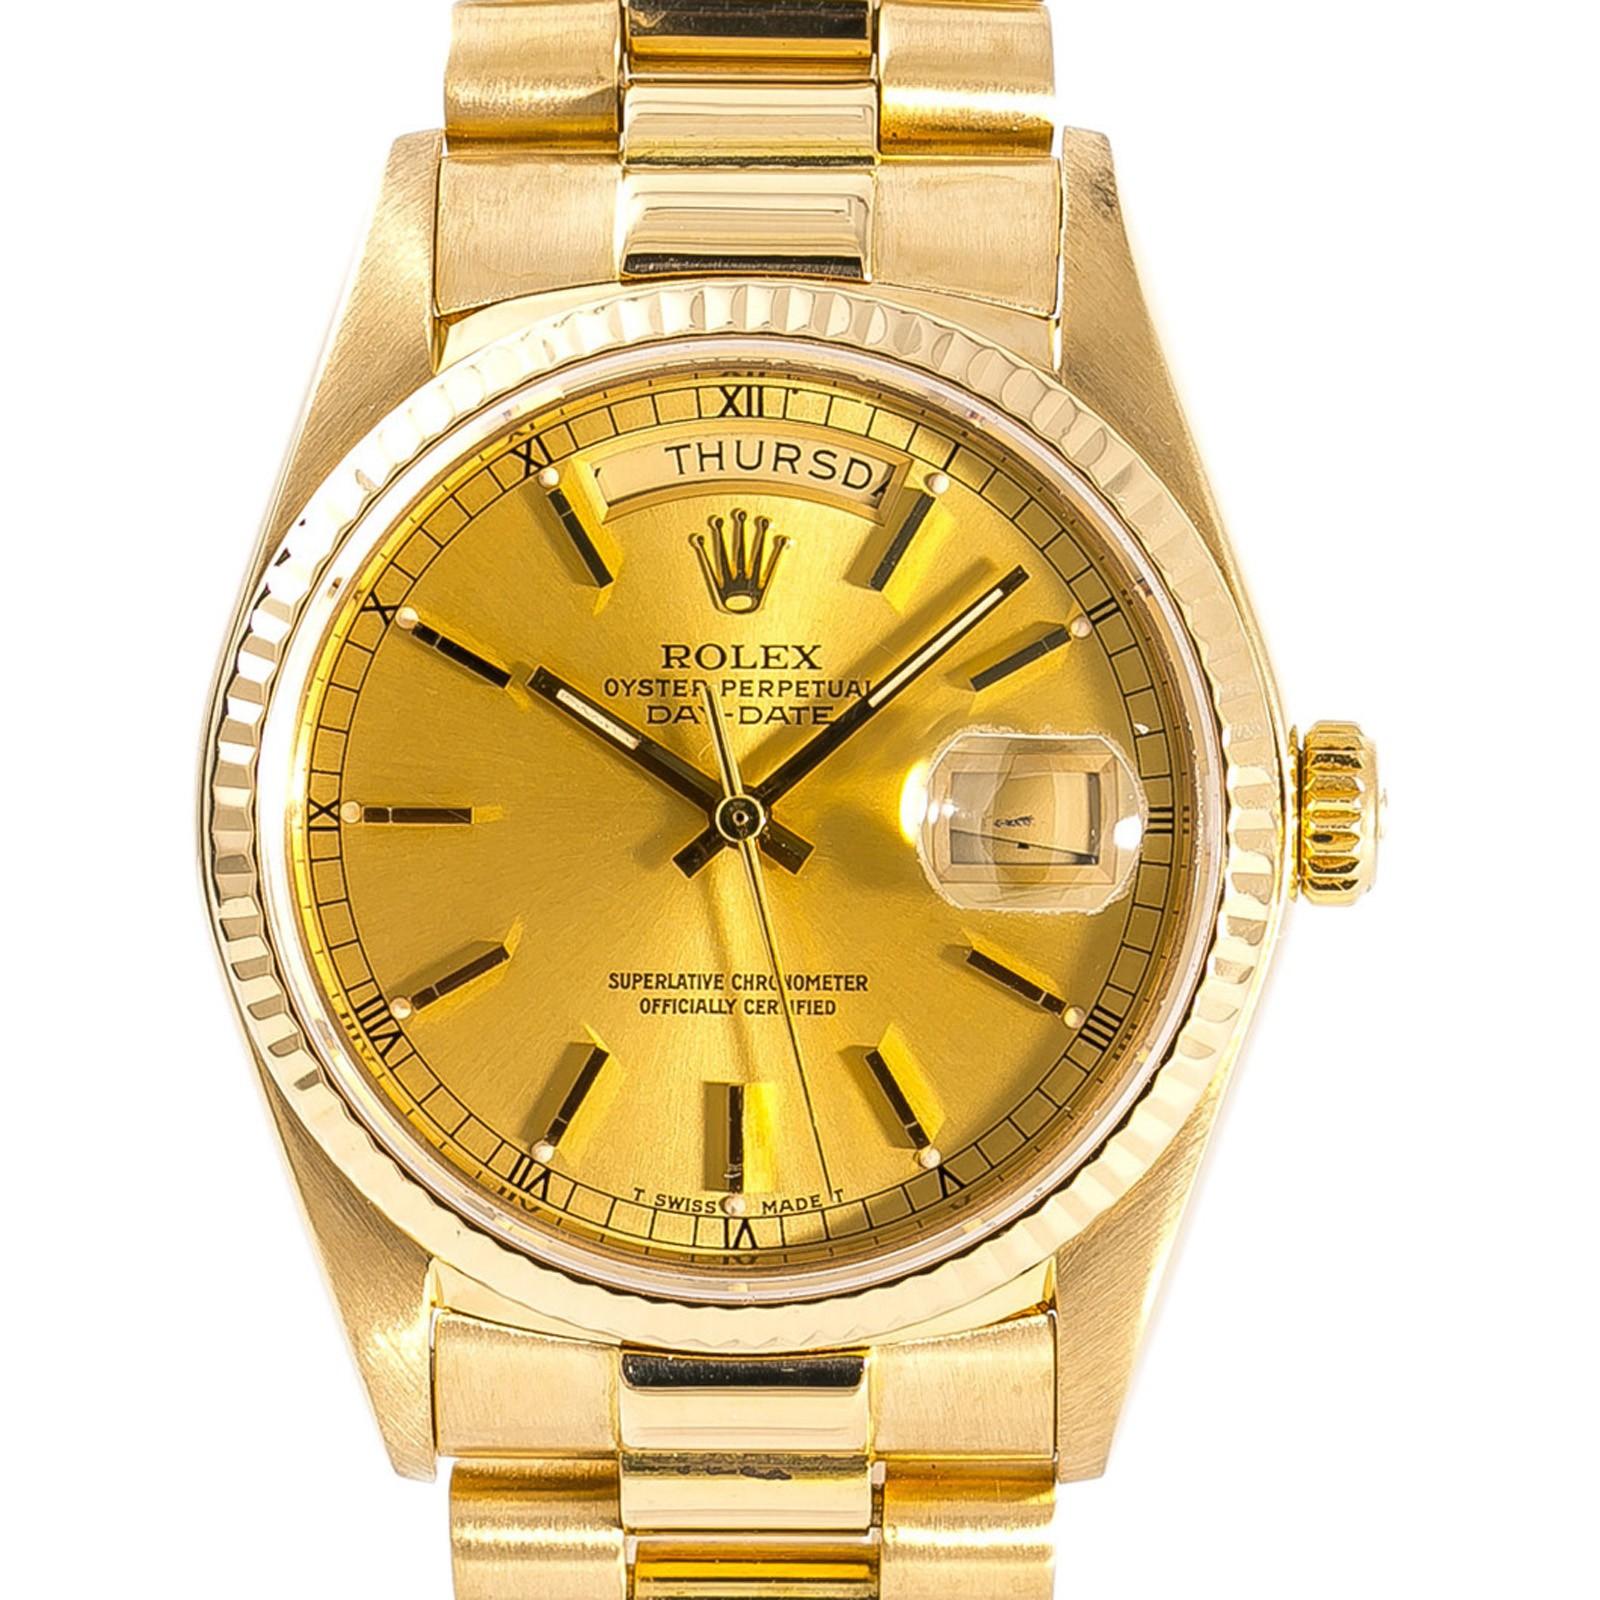 Women's Rolex Day-Date 18038, Champagne Dial Certified Authentic For Sale